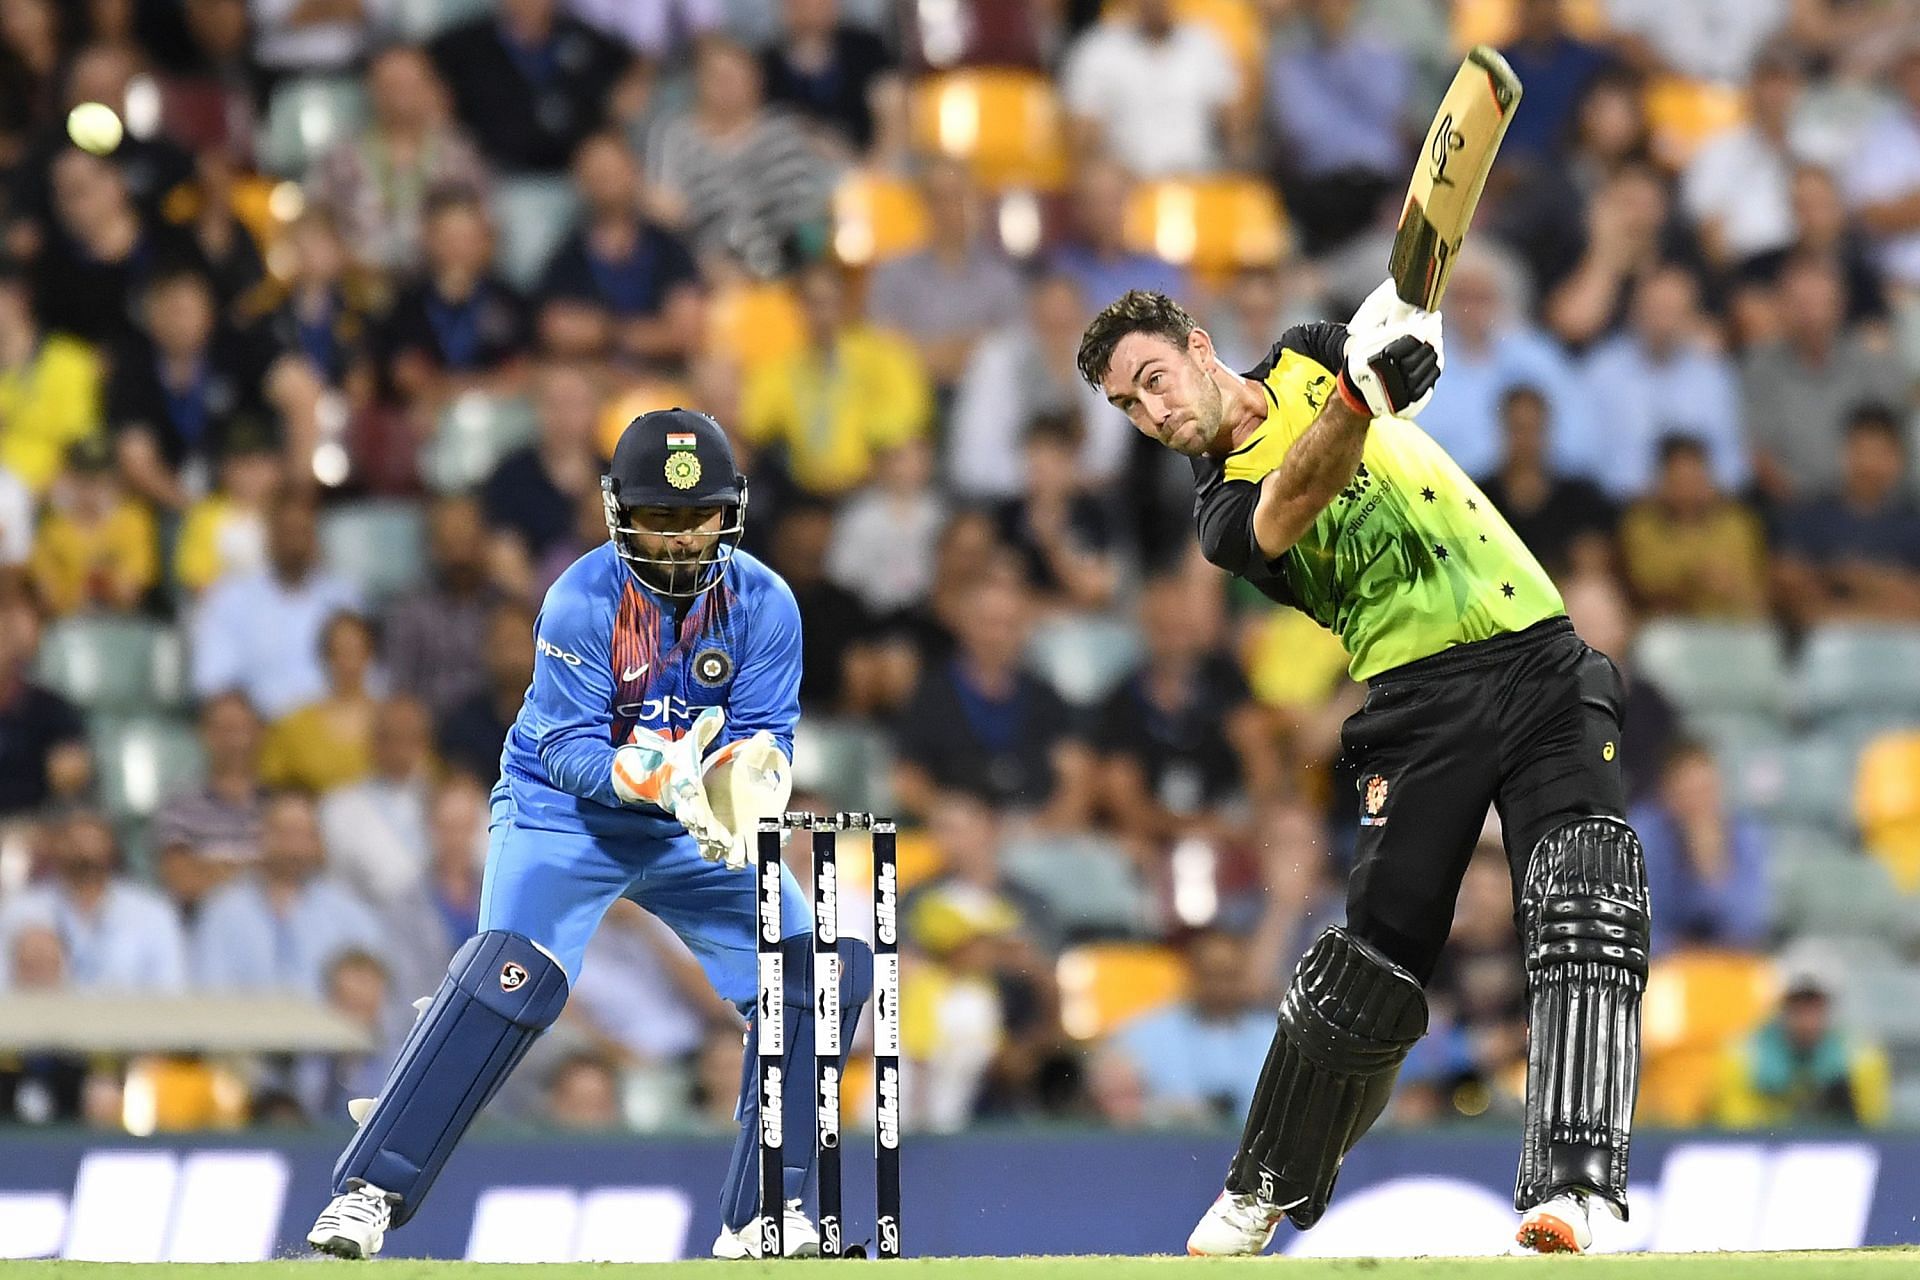 Australian all-rounder Glenn Maxwell during the 2018 Brisbane T20I. Pic: Getty Images